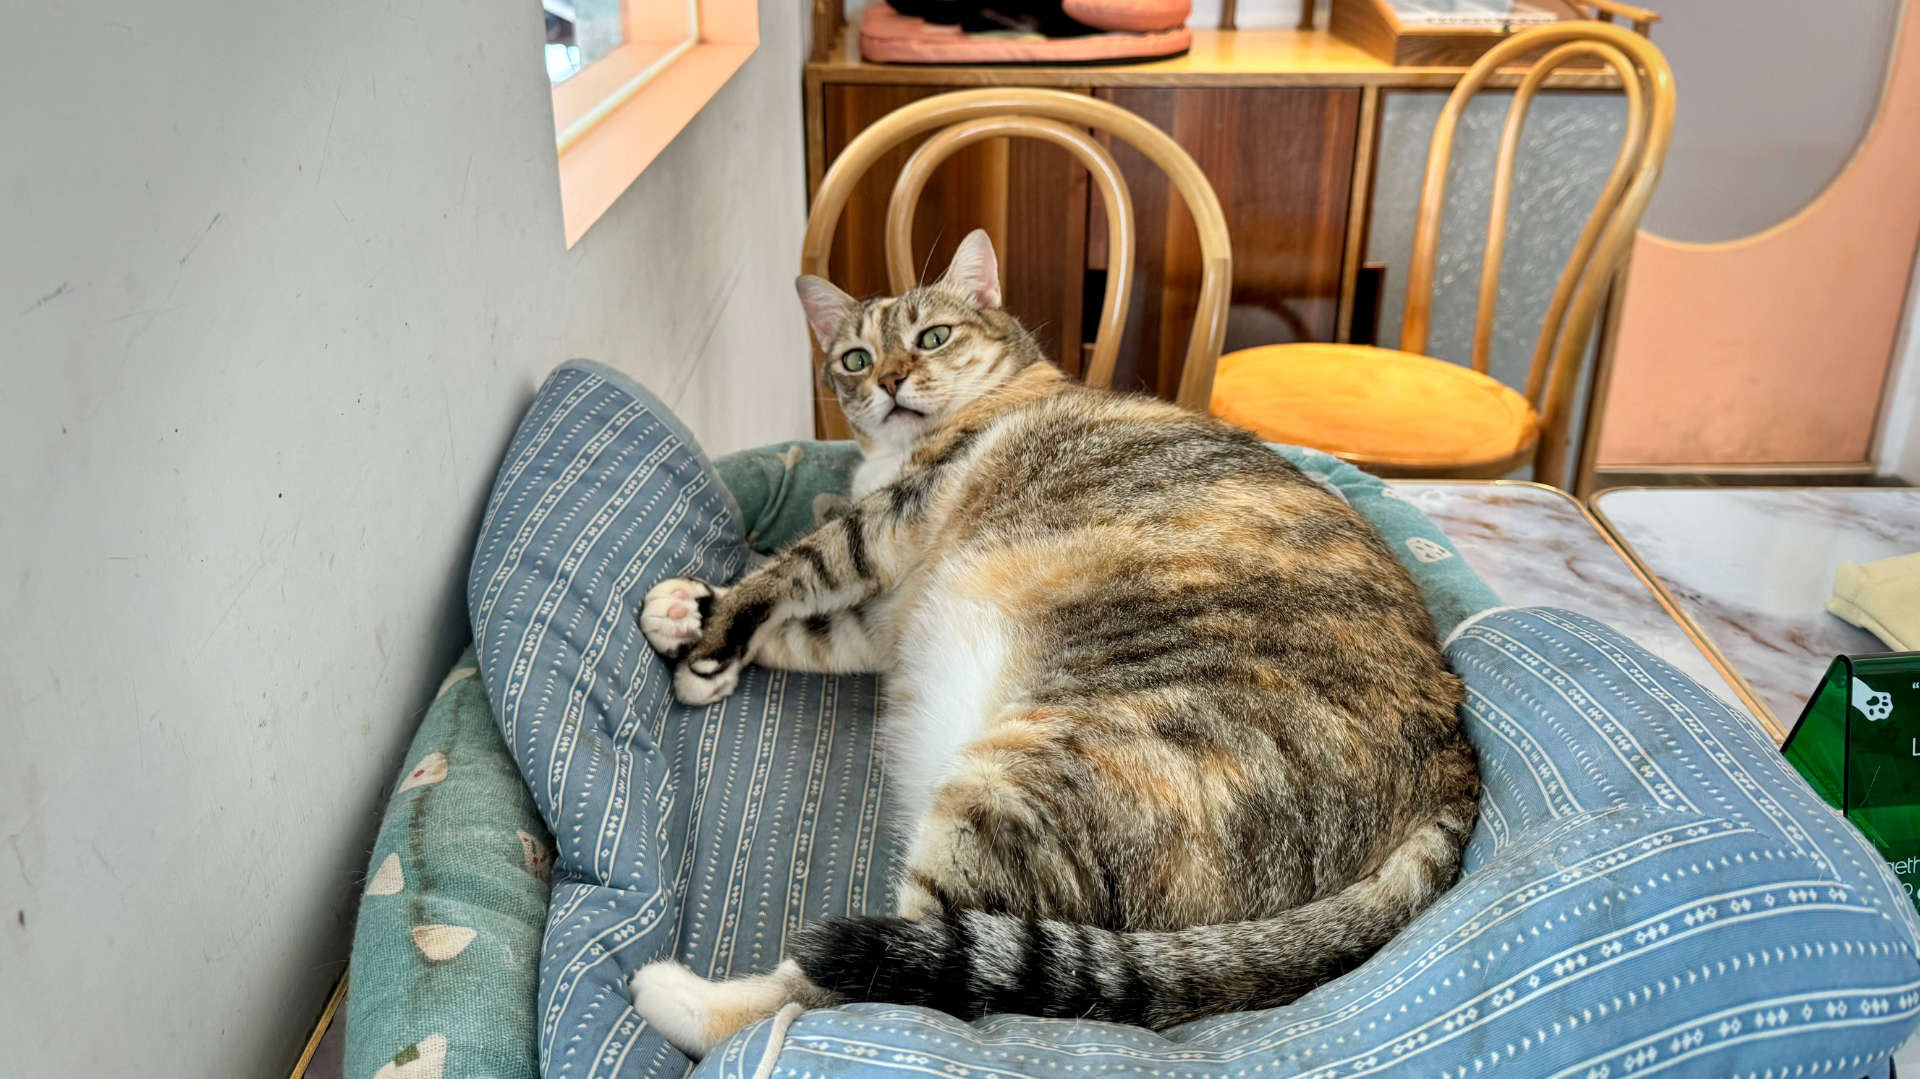 A fat cat laying in a cat bed, with a shocked expression on its face.